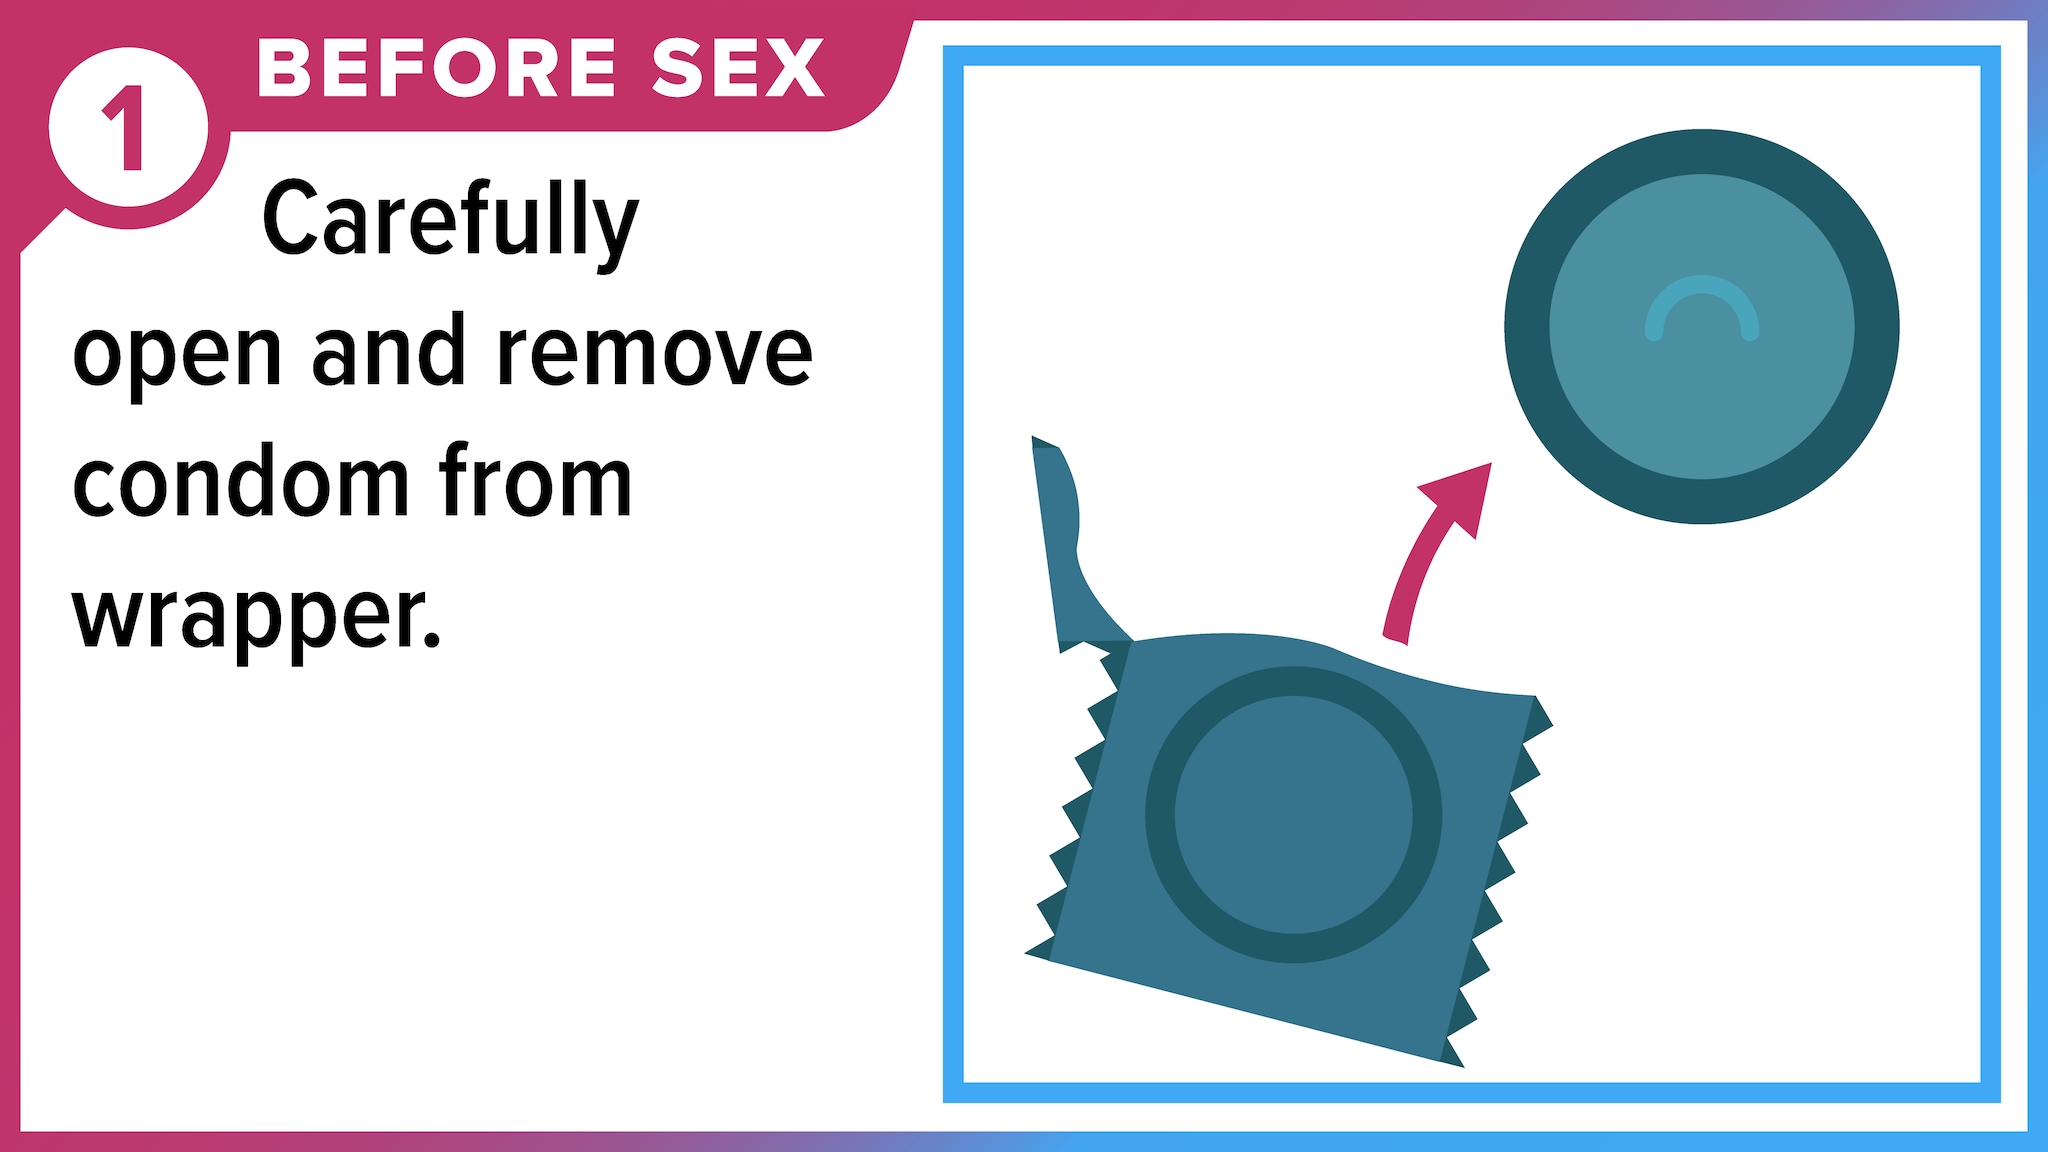 A condom removed from condom wrapper. Before sex, carefully open and remove condom from wrapper.